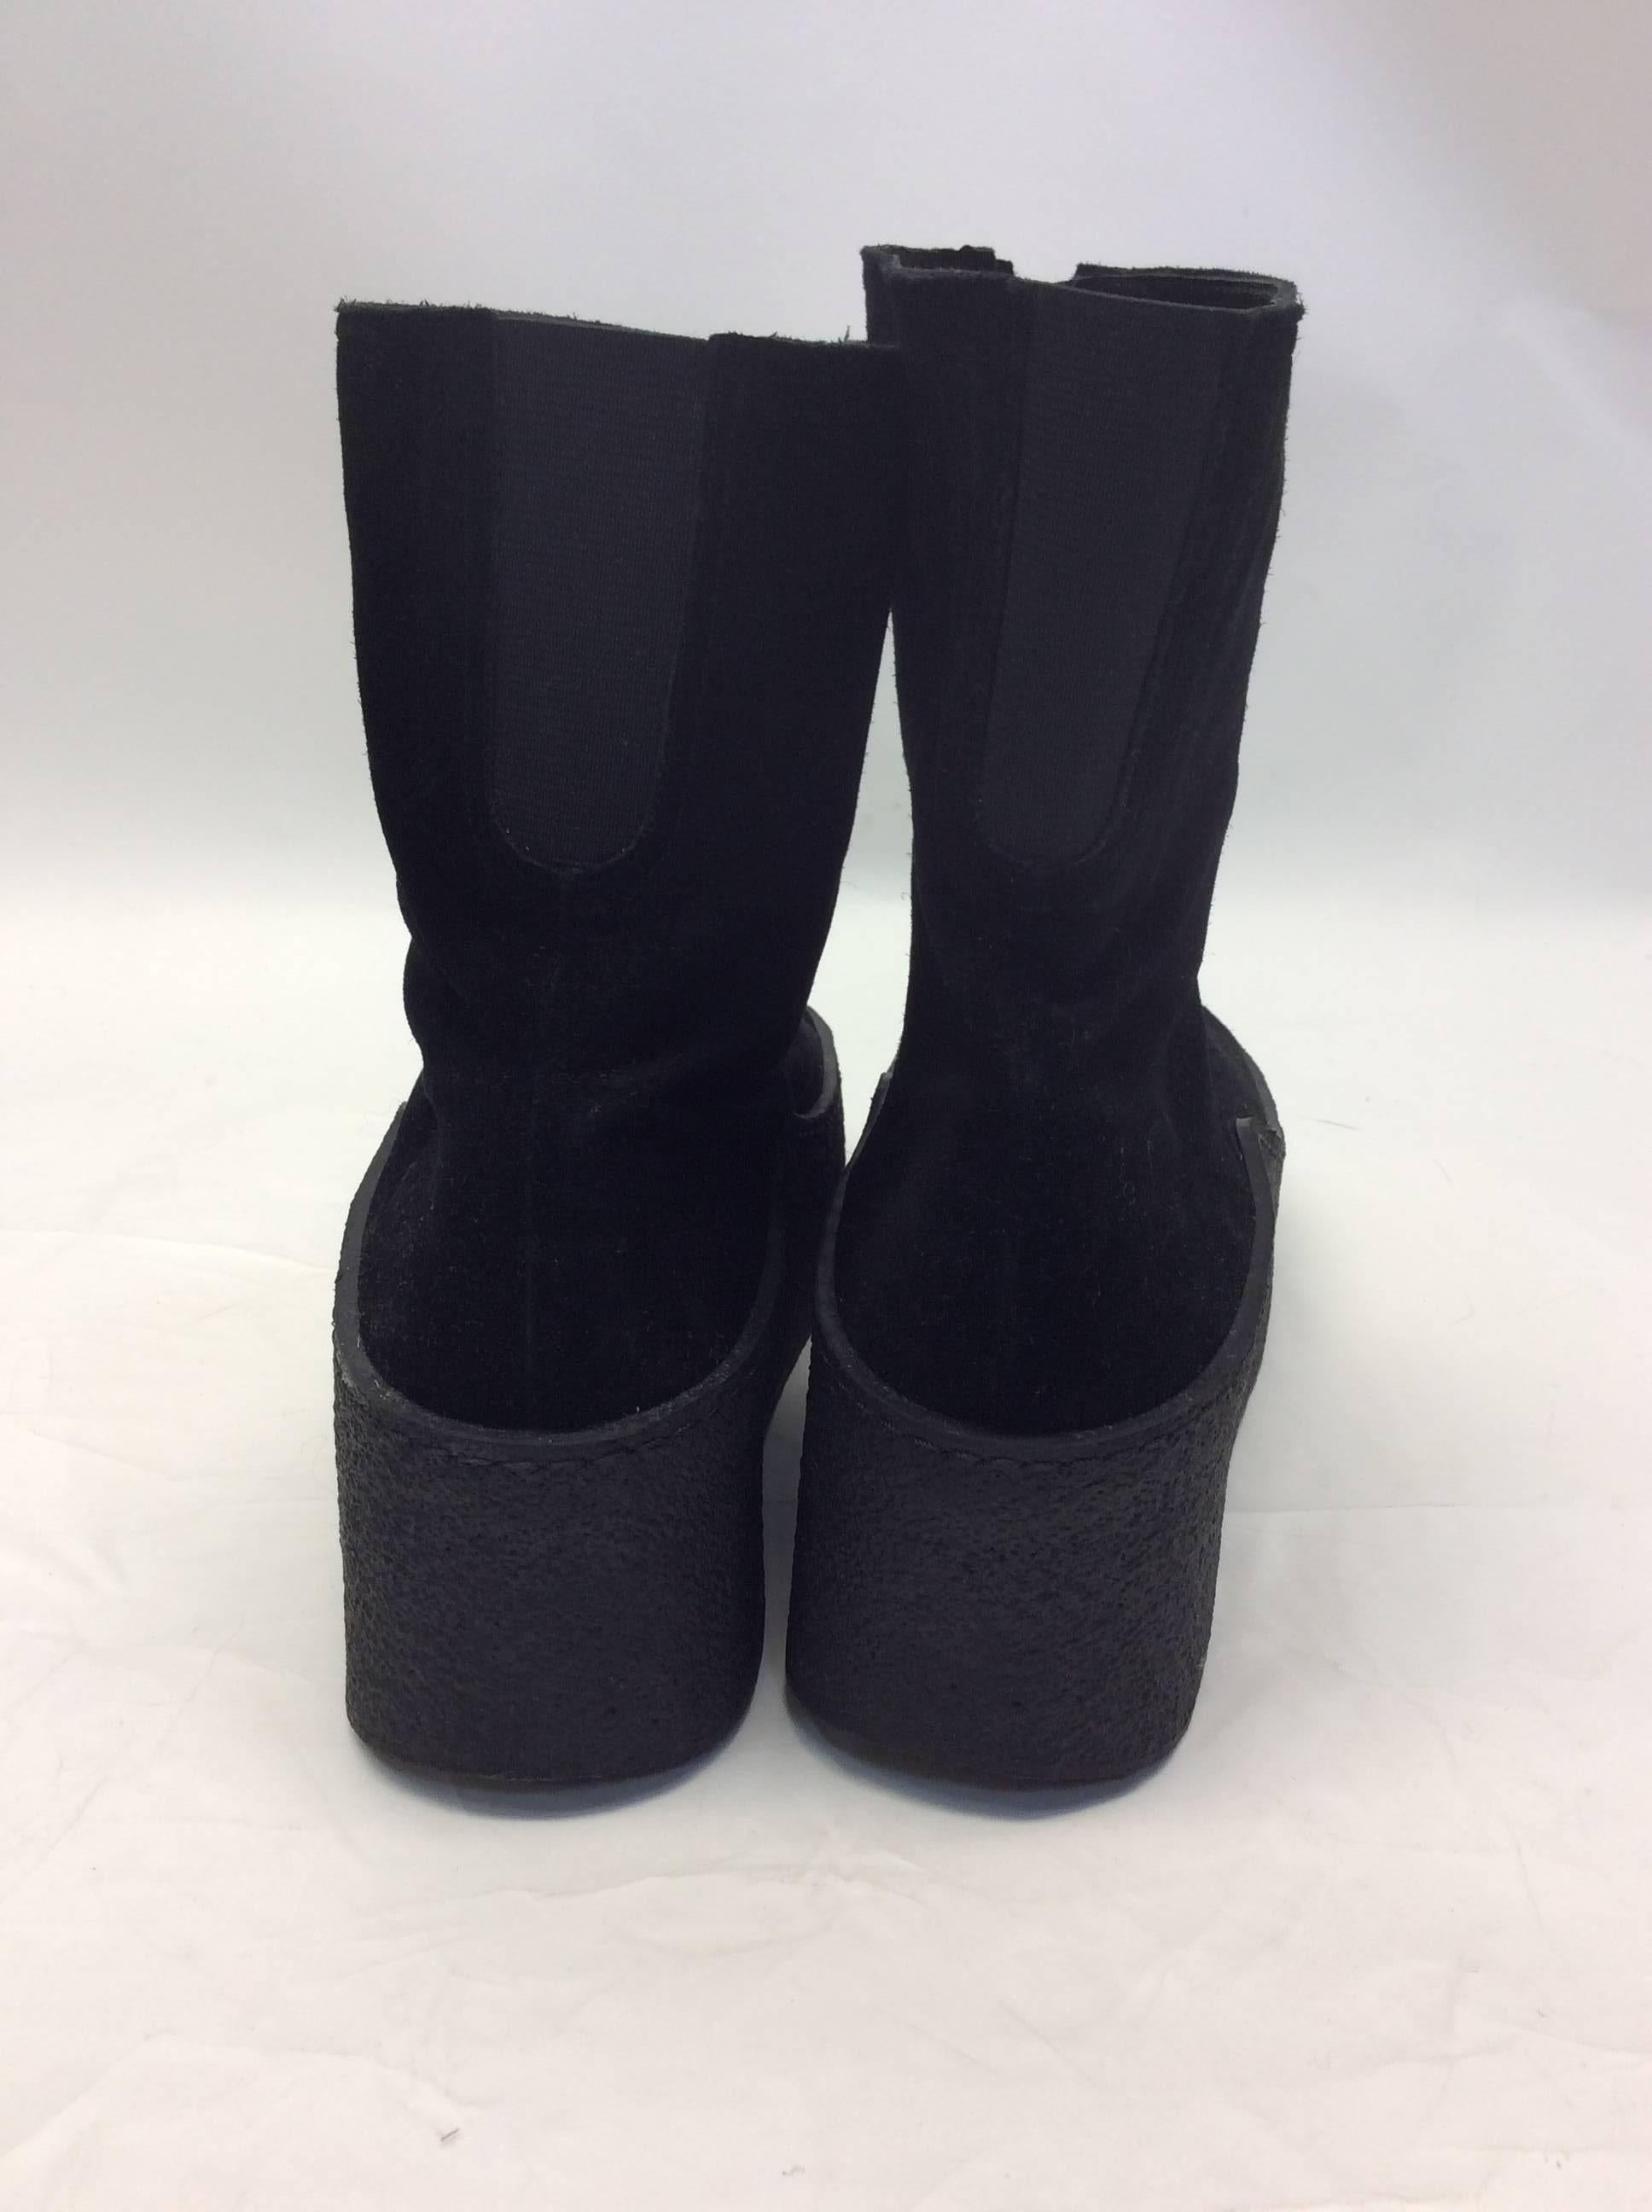 Robert Clergie Platform Suede Zip Ankle Boots In Excellent Condition For Sale In Narberth, PA